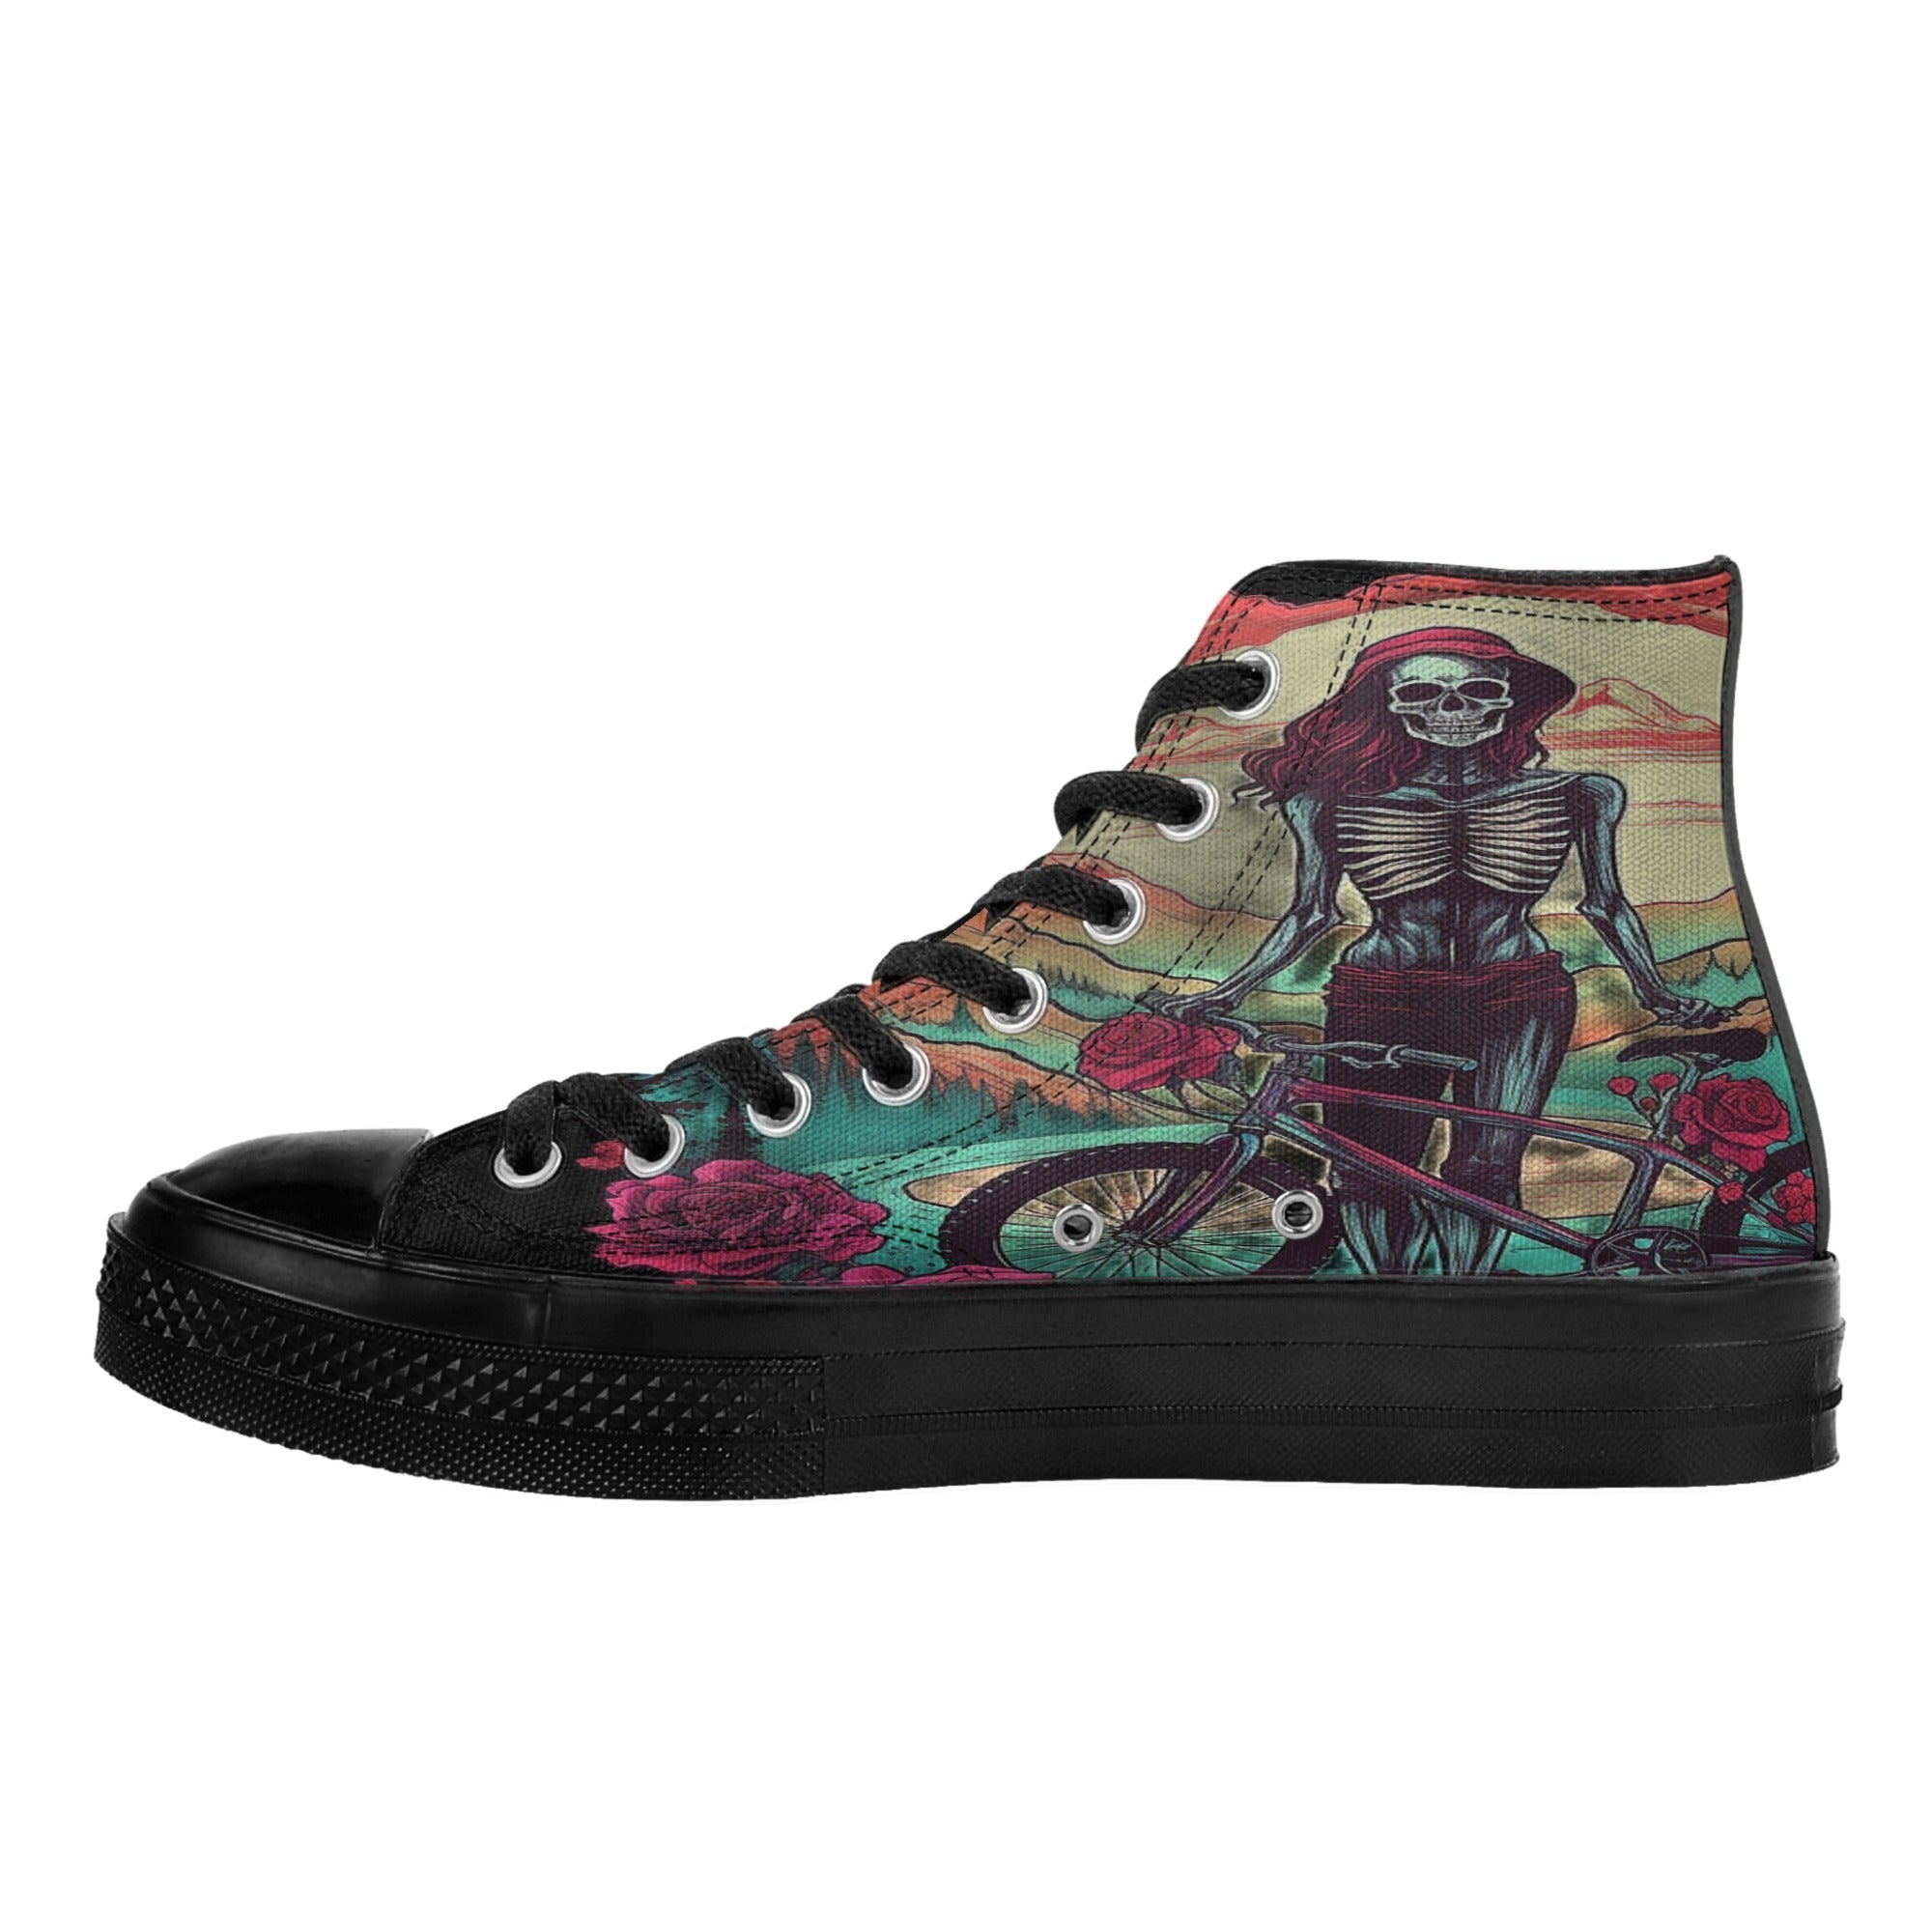 Women's Classic Black High Top Canvas Shoes - Single Track Dreamer